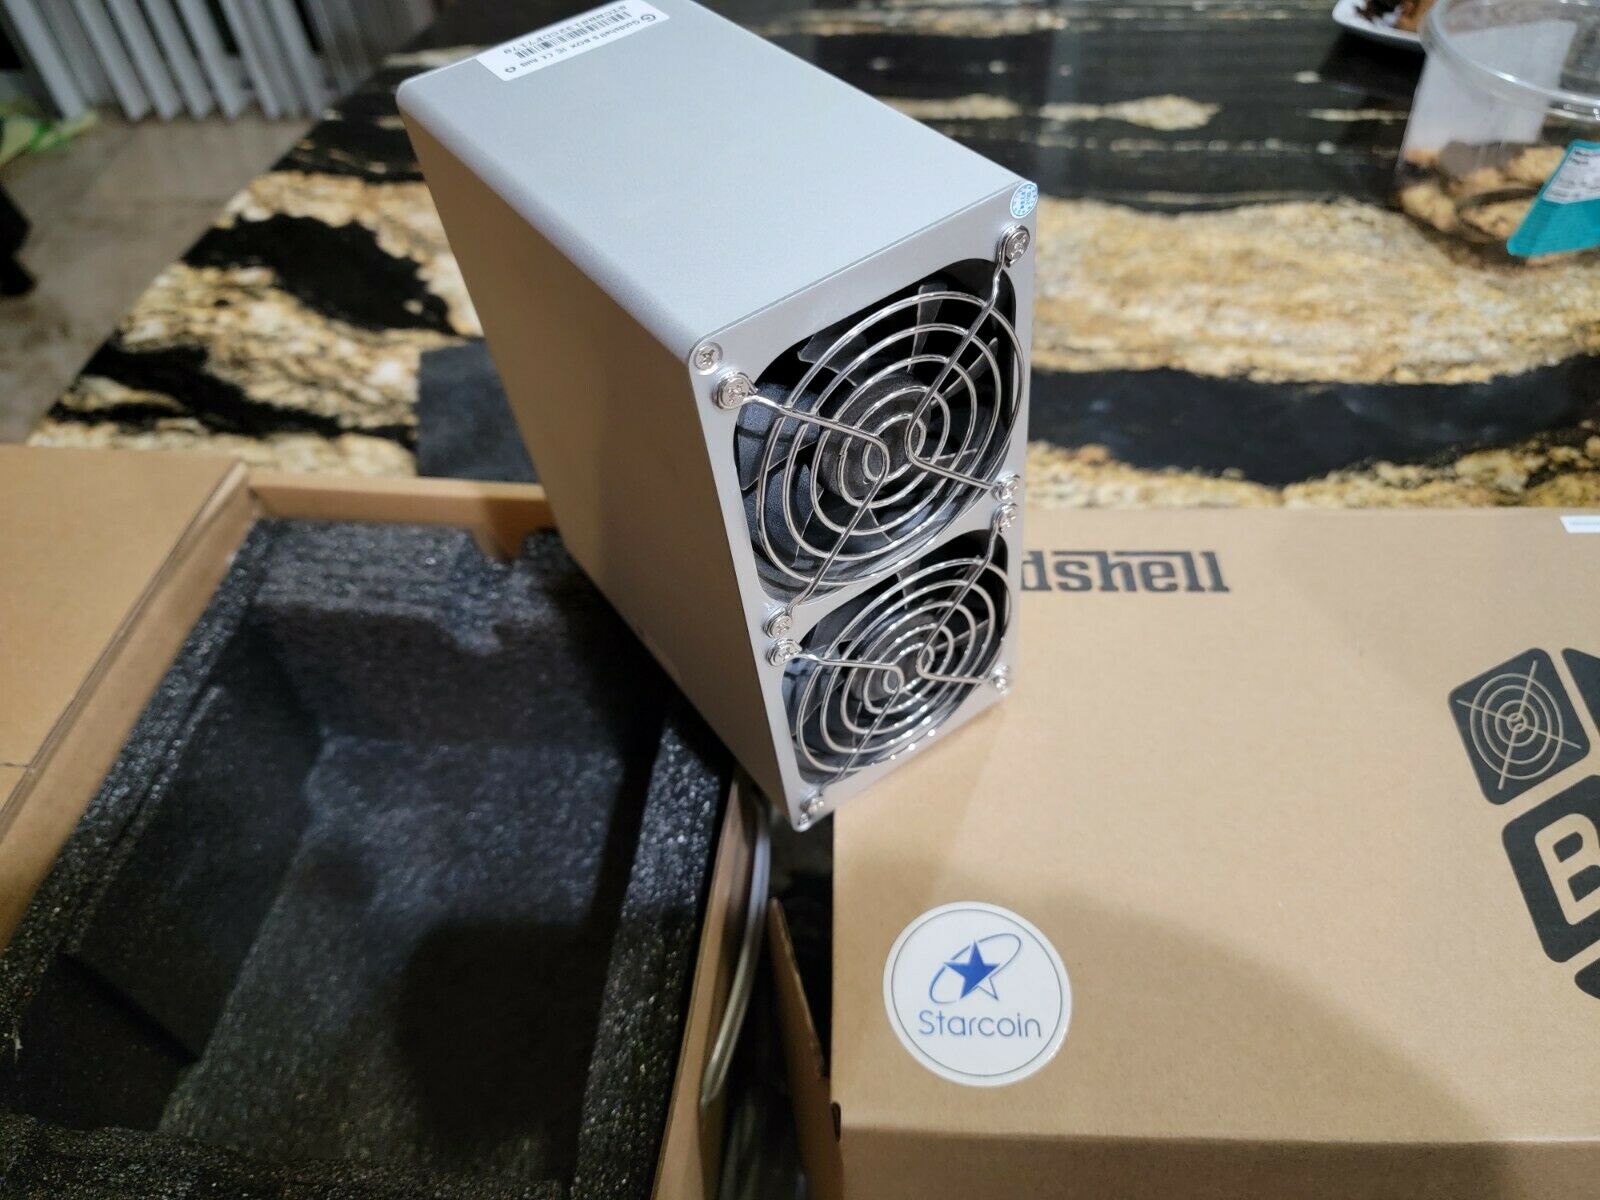 New Goldshell St Box Starcoin Miner 13.9khs 61w Without Power Supply (9)